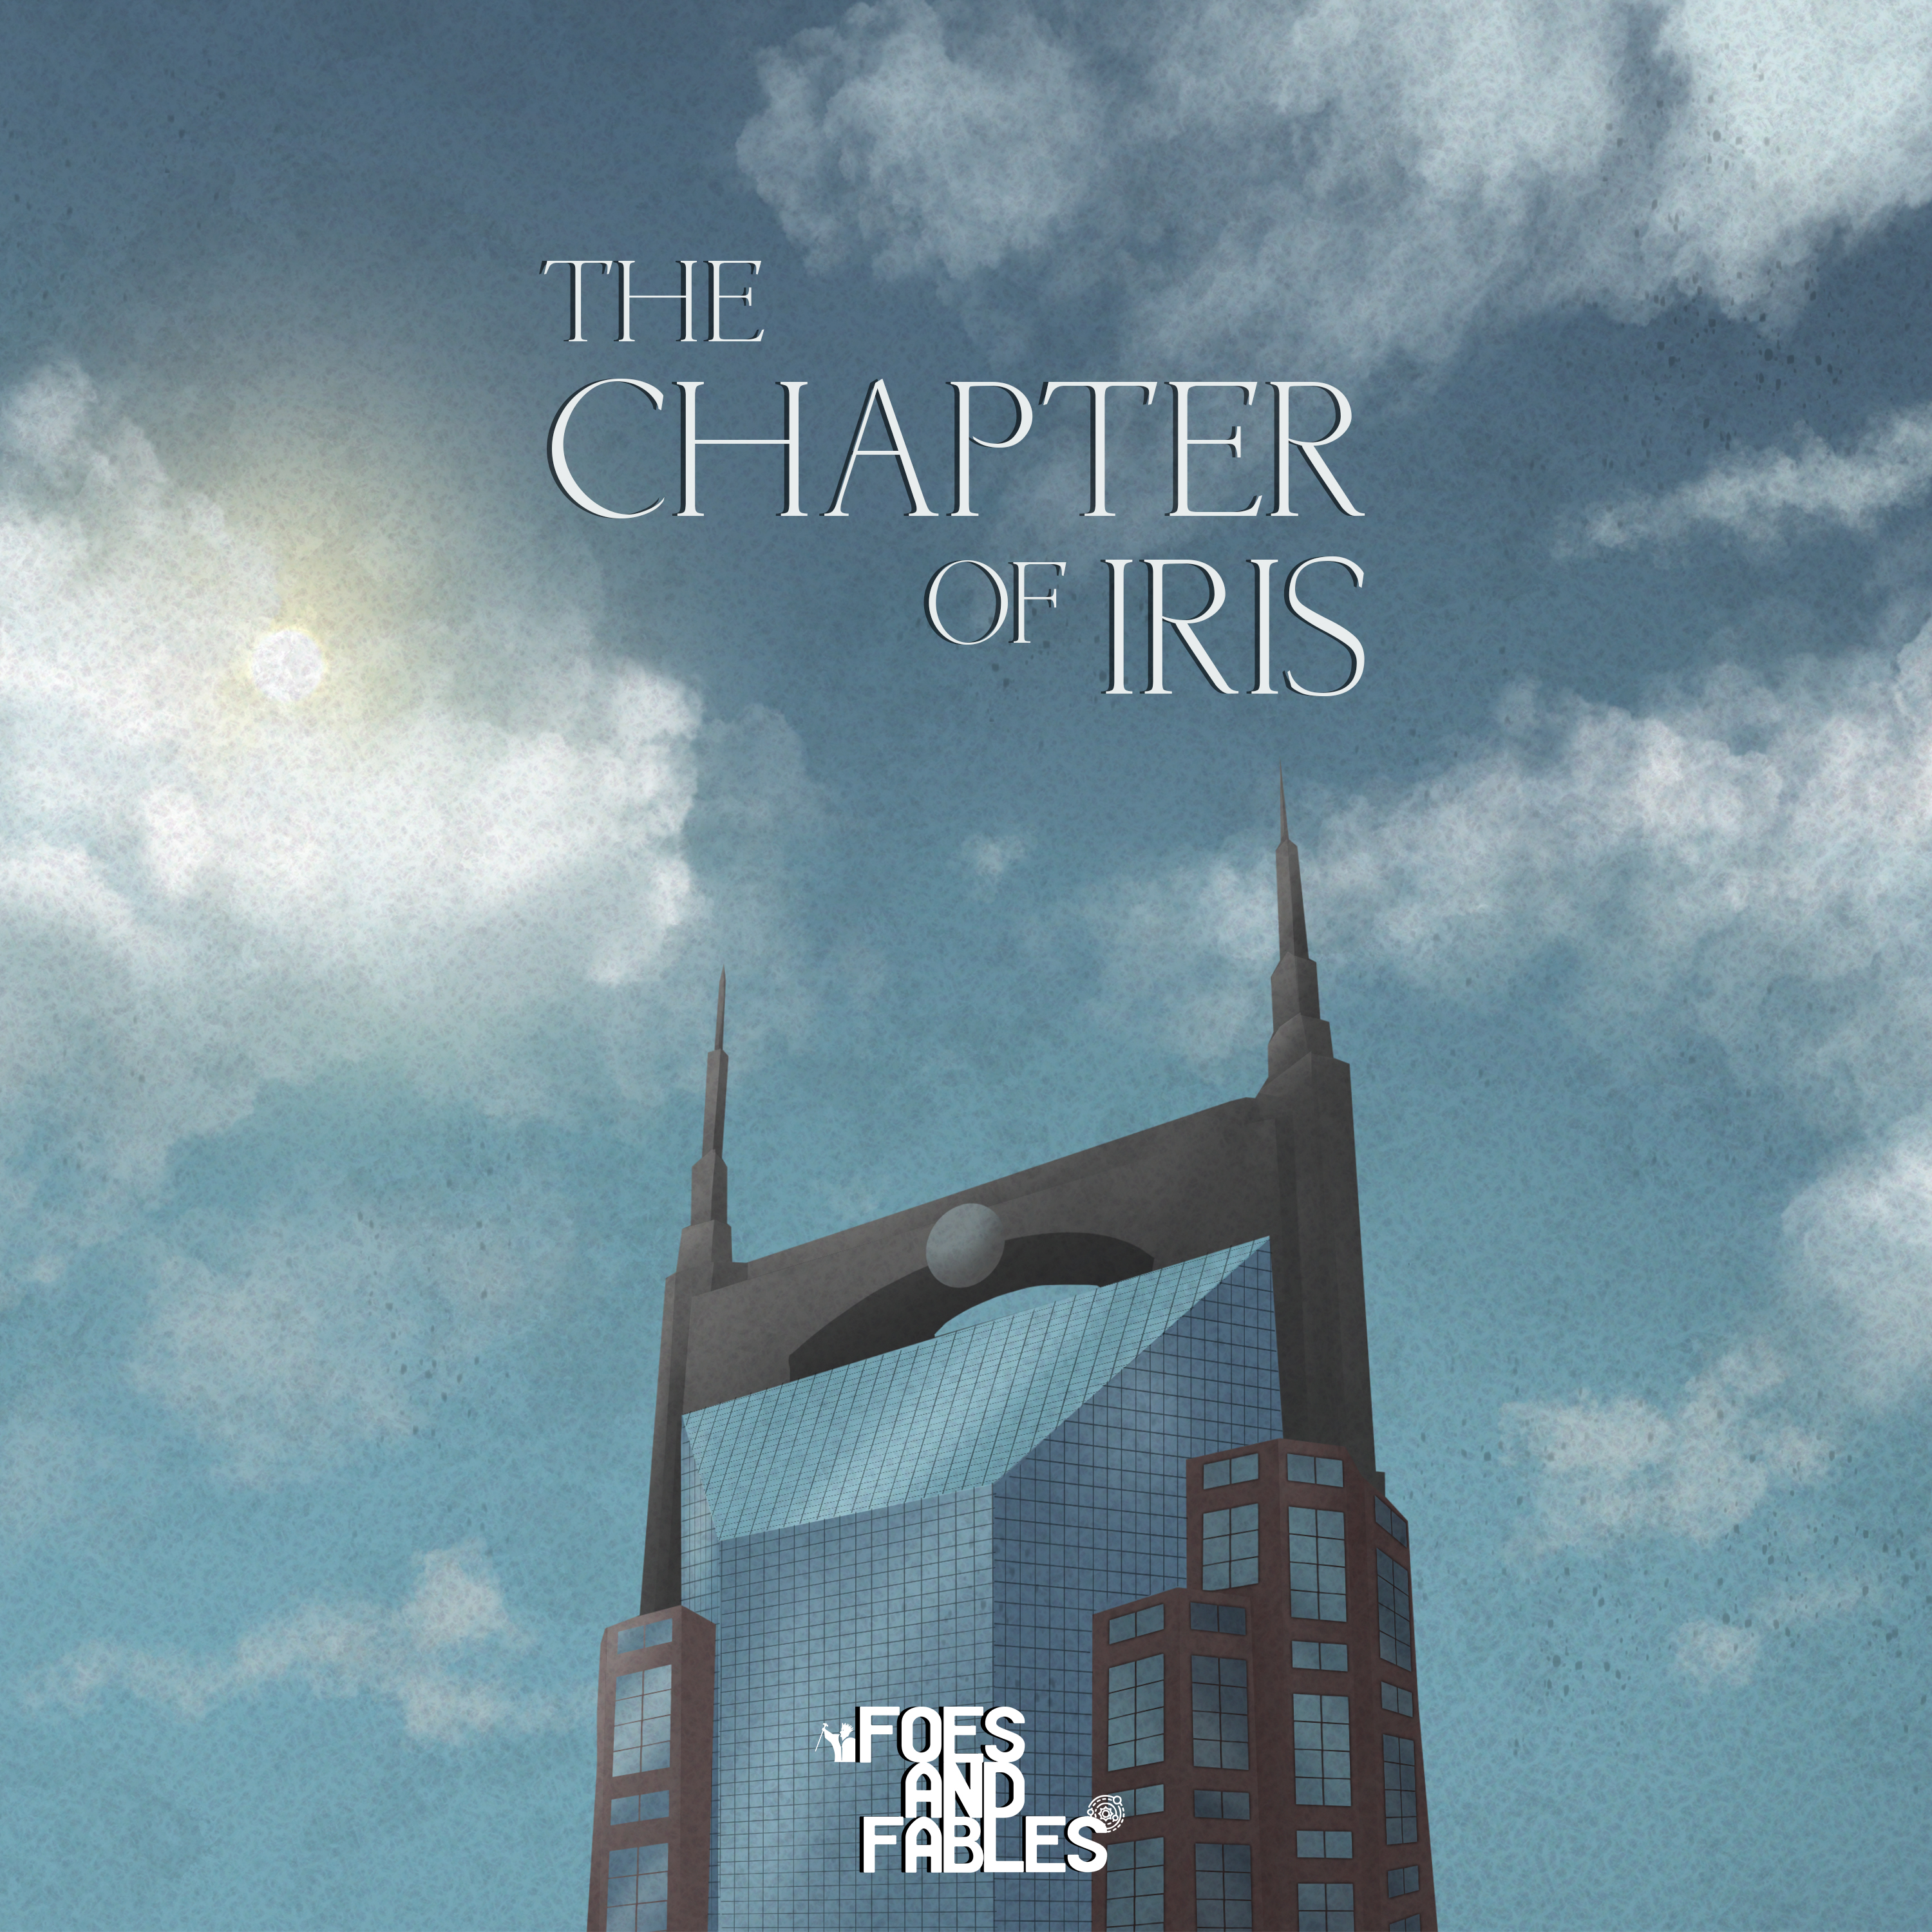 7. The Deck of Many Things (Part 1) | The Chapter of Iris